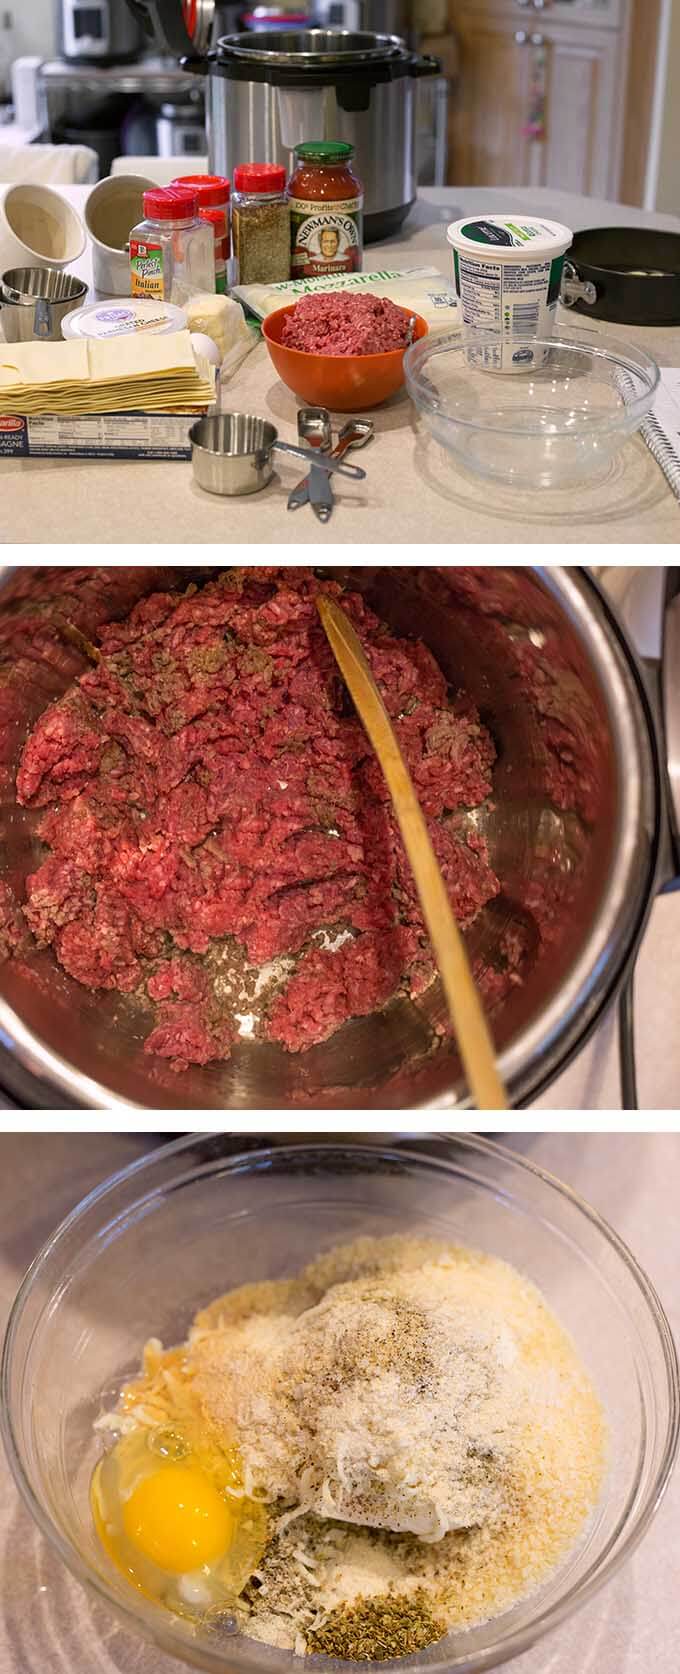 Three images of lasagna making steps, ingredients, sauce ingredients in pot, and cheese and egg ingredients in glass mixing bowl